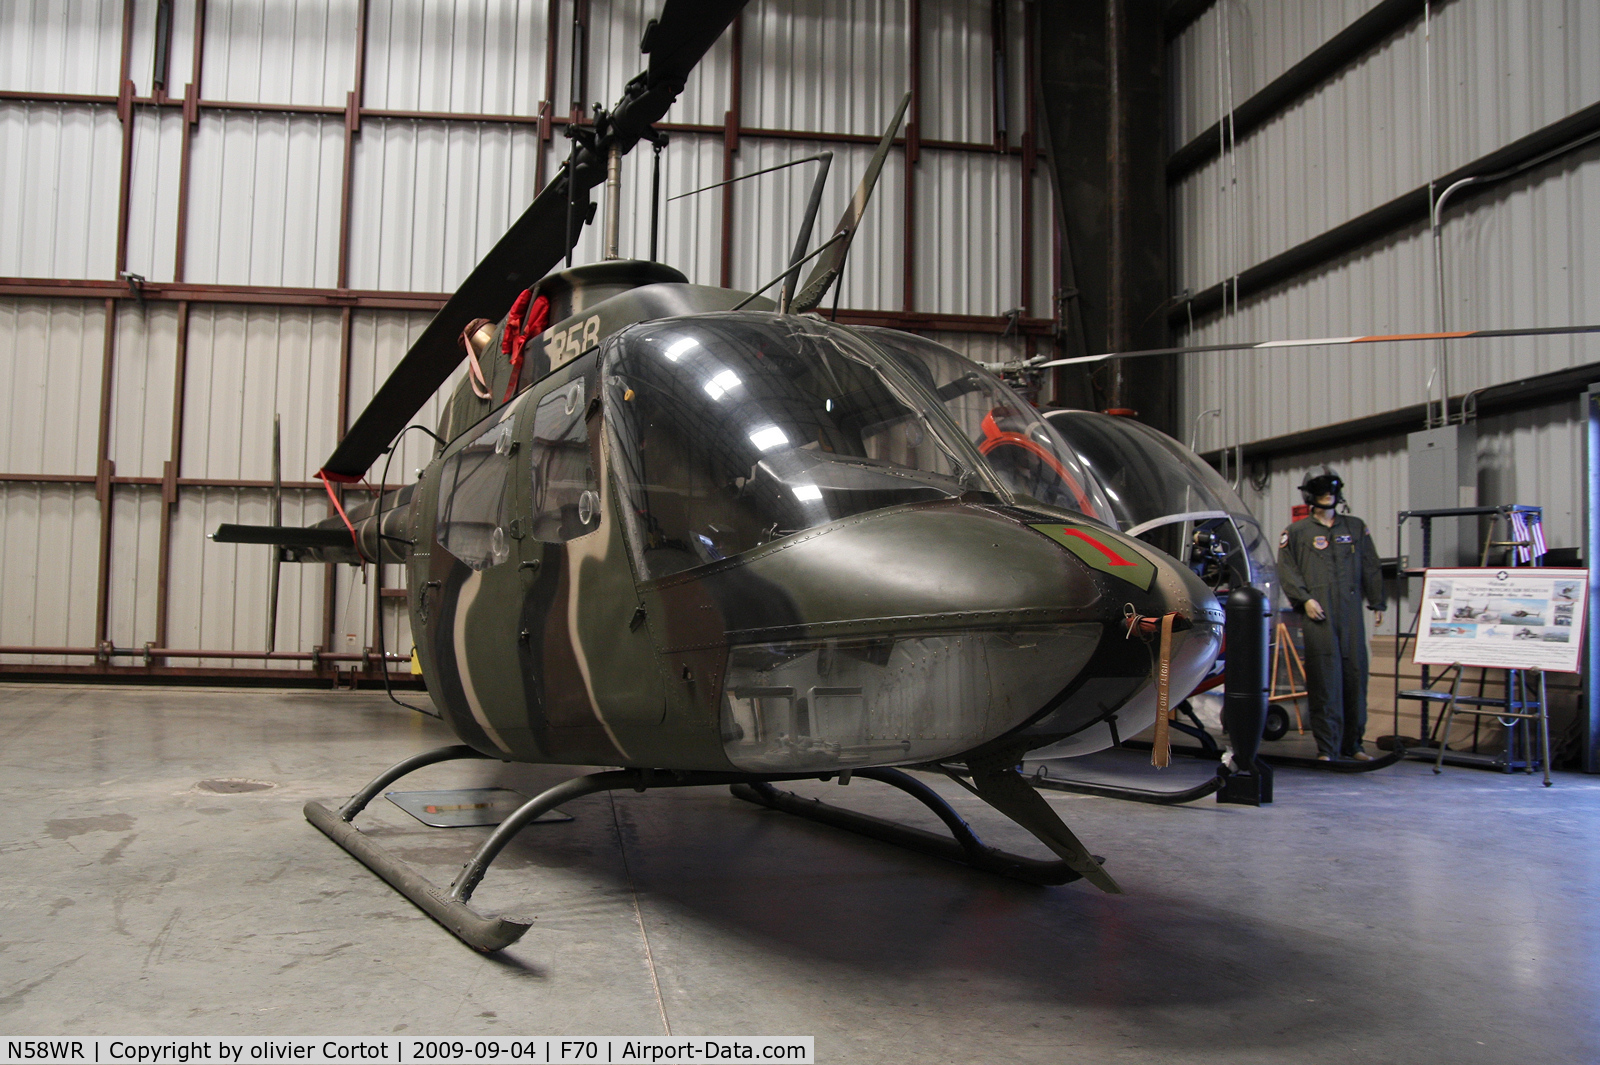 N58WR, 1971 Bell OH-58C C/N 70-15258 (40809), At home in Murrieta ; the unusual camouflage was actually worn during the gulf war.